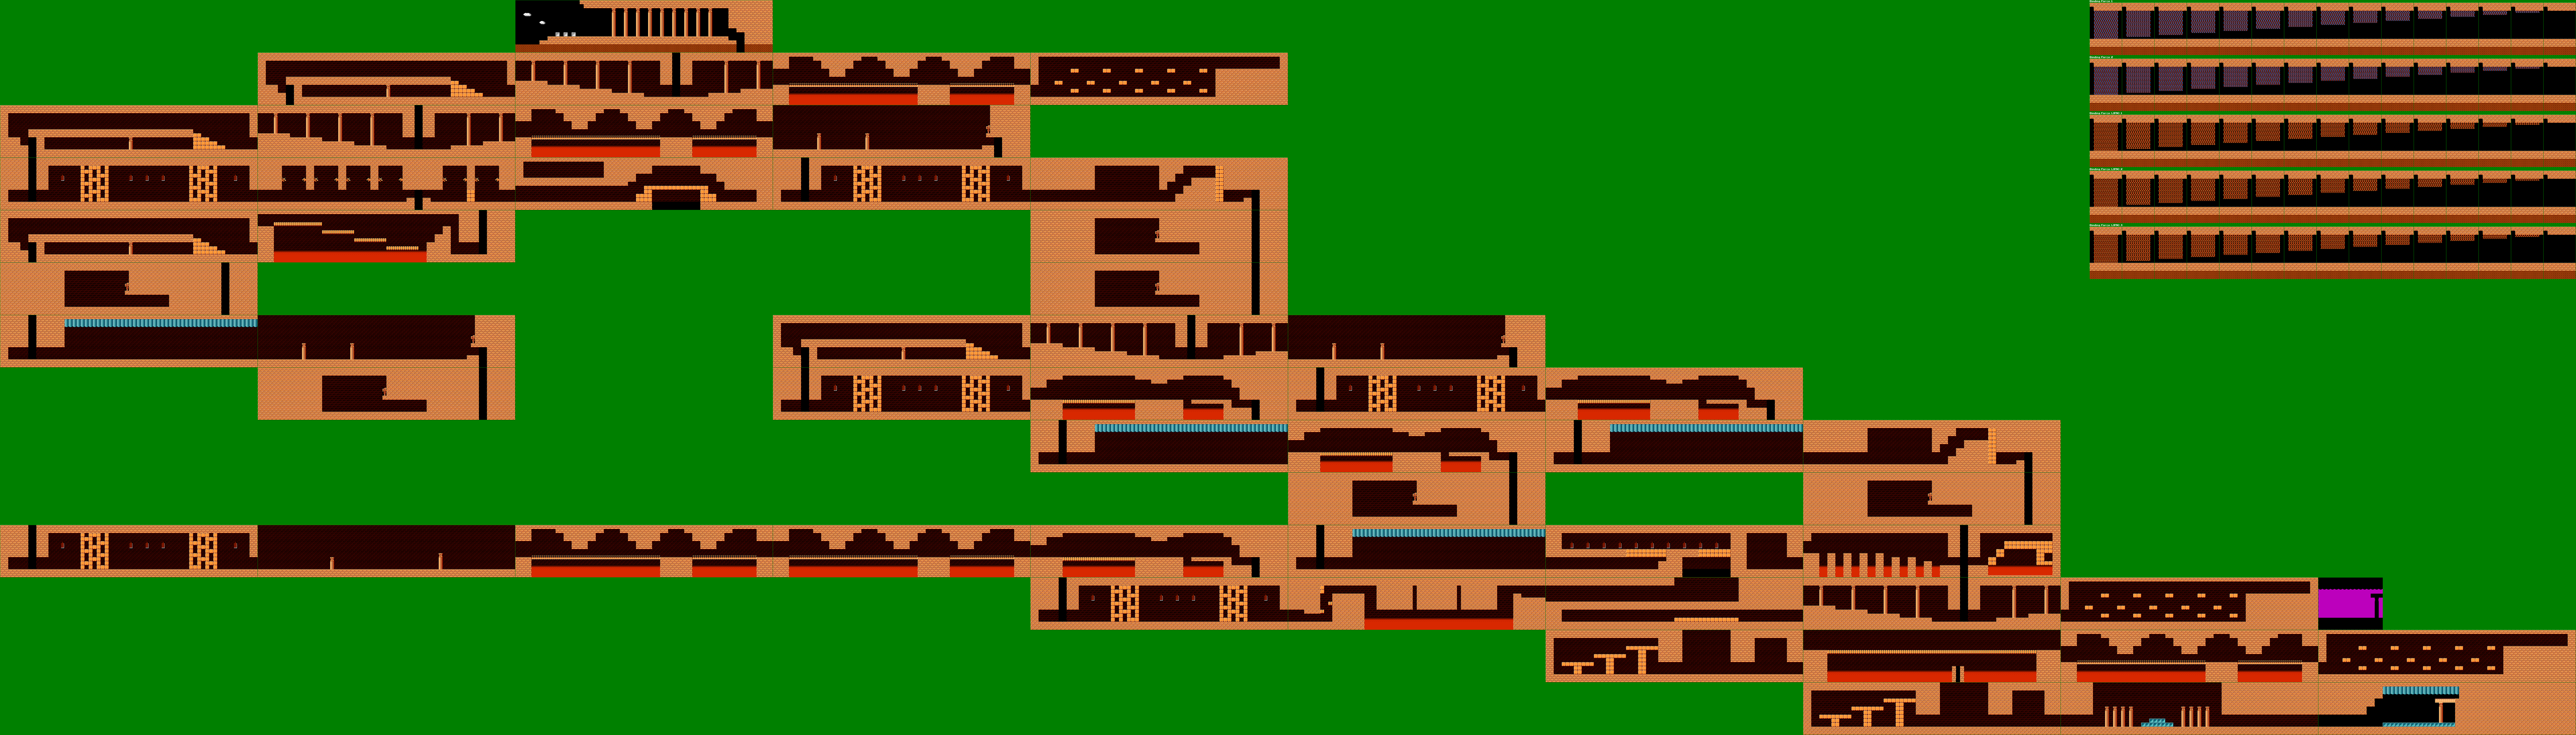 nes-zelda-2-the-adventure-of-link-great-palace-the-spriters-resource